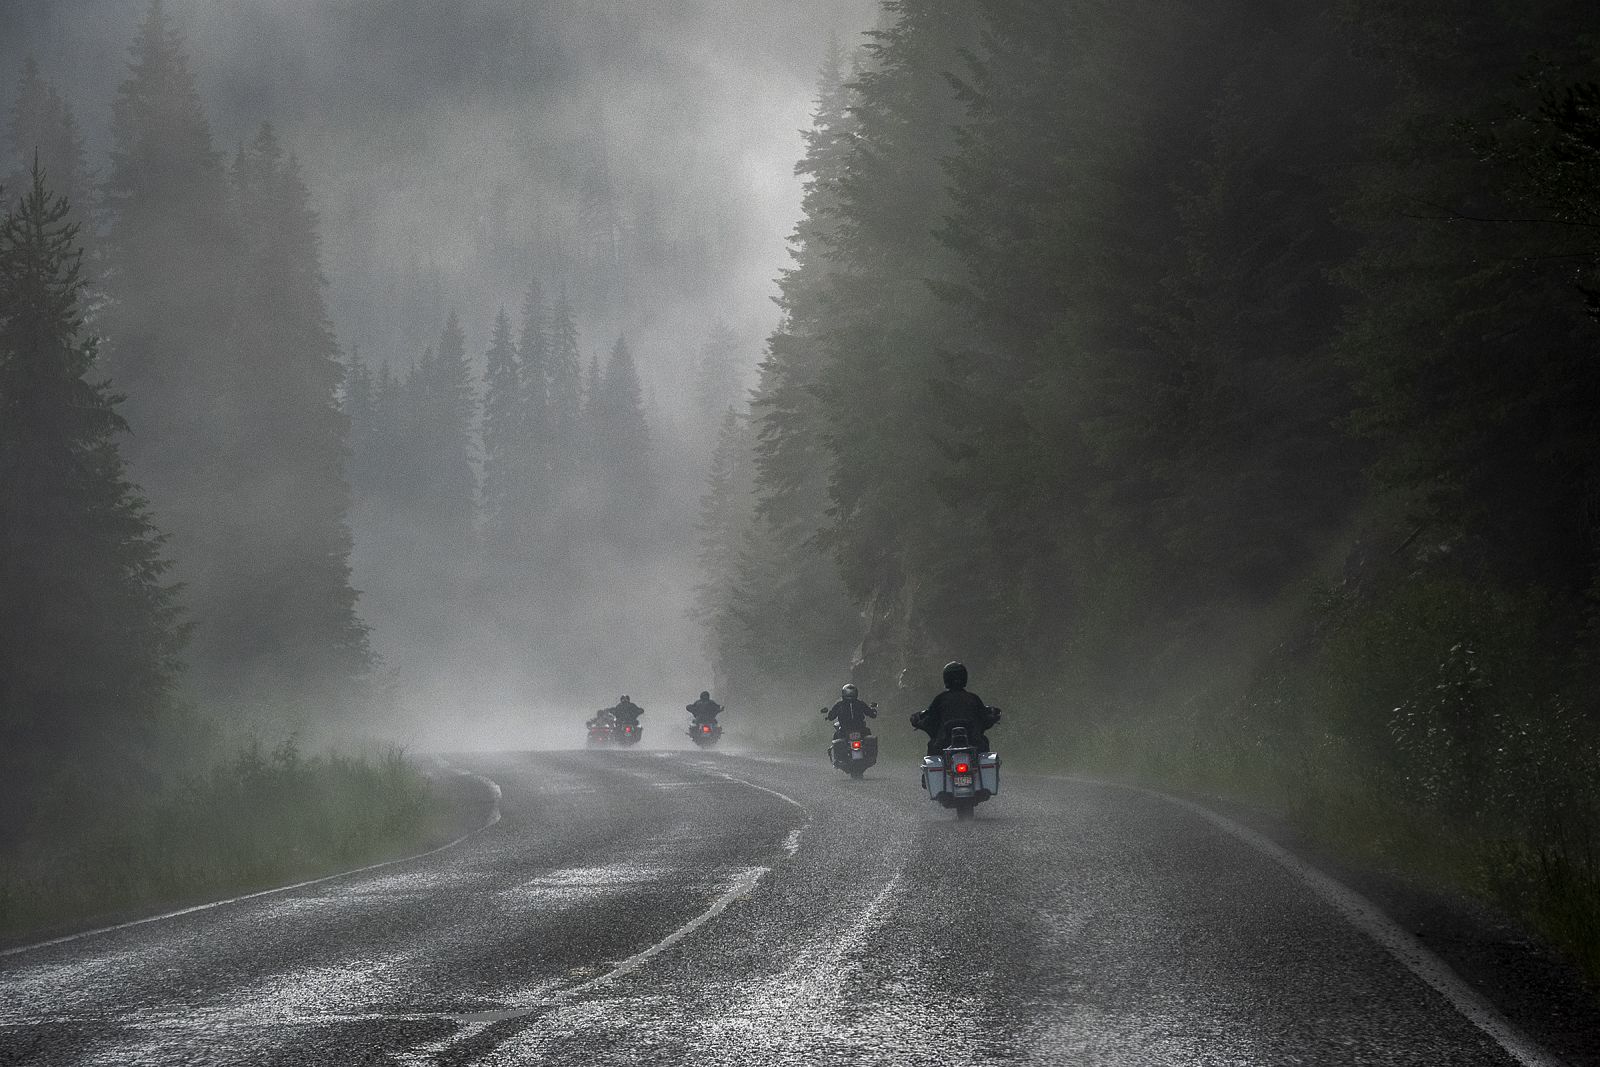 Riding in the Mist